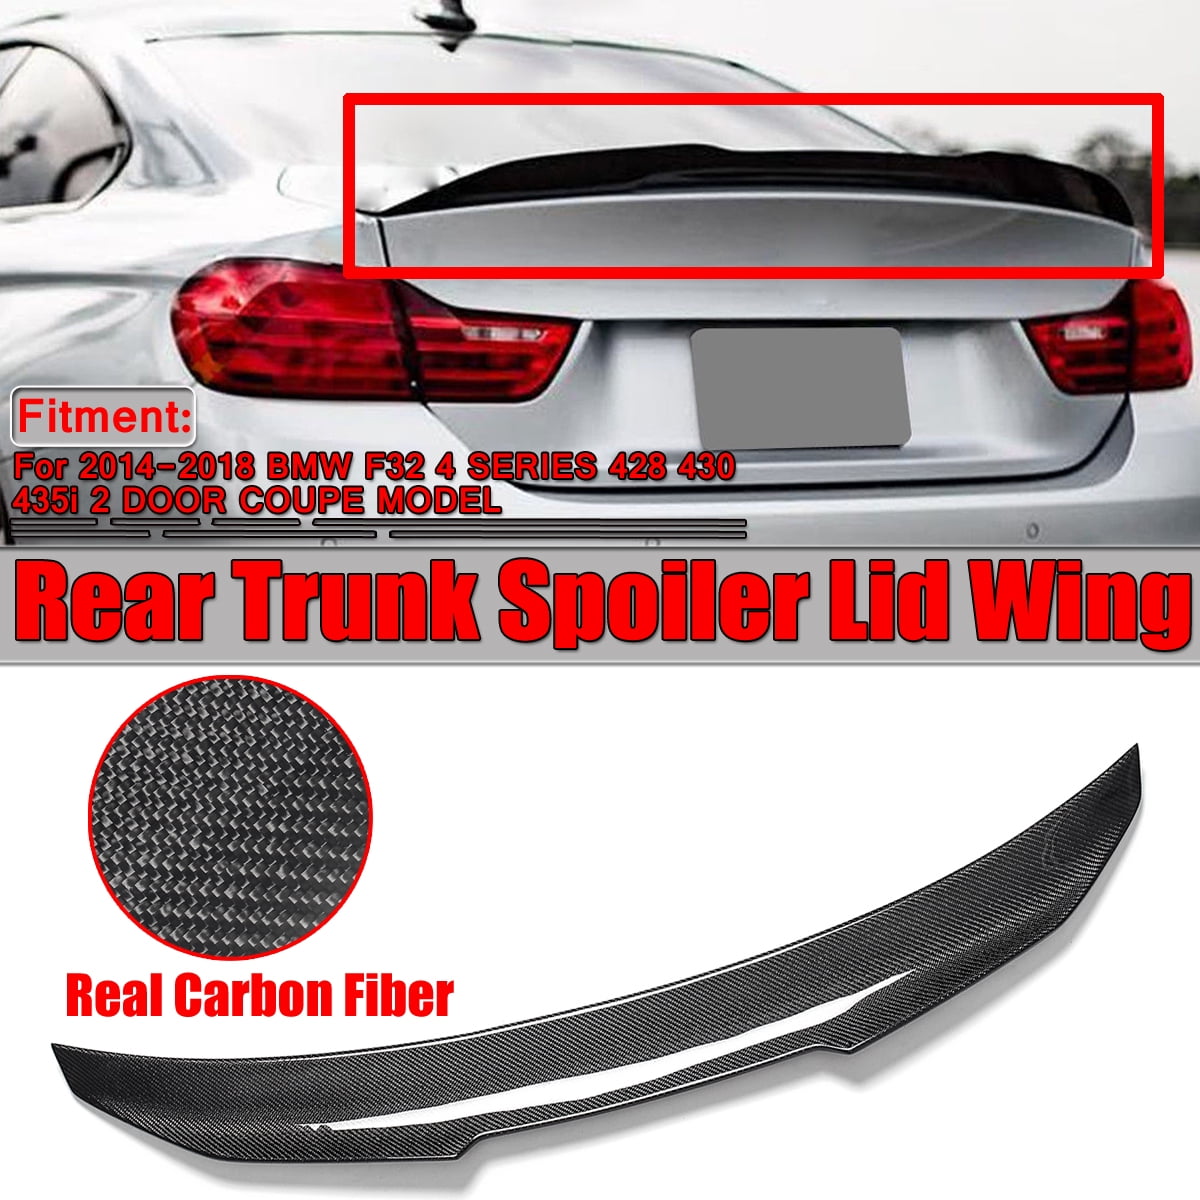 For BMW F32 4 Series 2014-2018 2DR PSM Type Real Carbon Fiber Trunk Spoiler Wing 